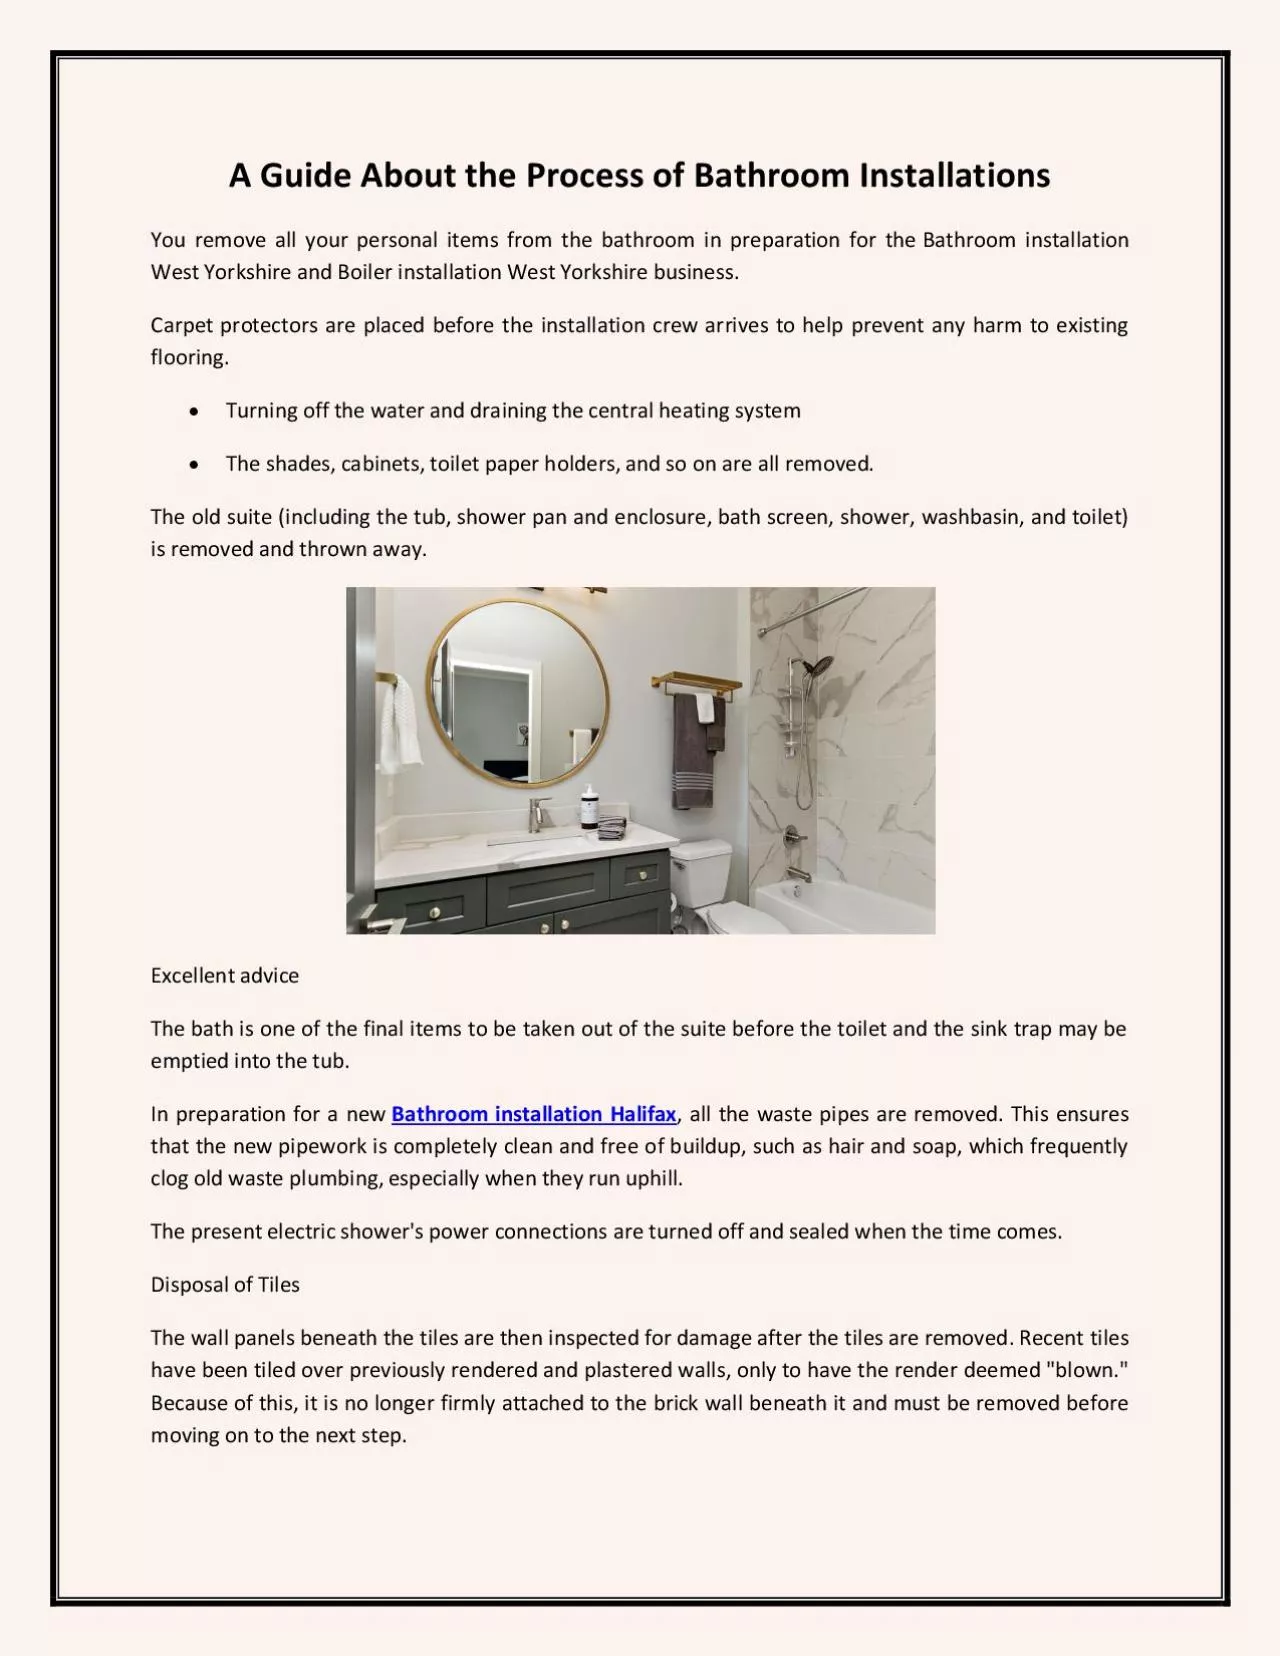 A Guide About the Process of Bathroom Installations